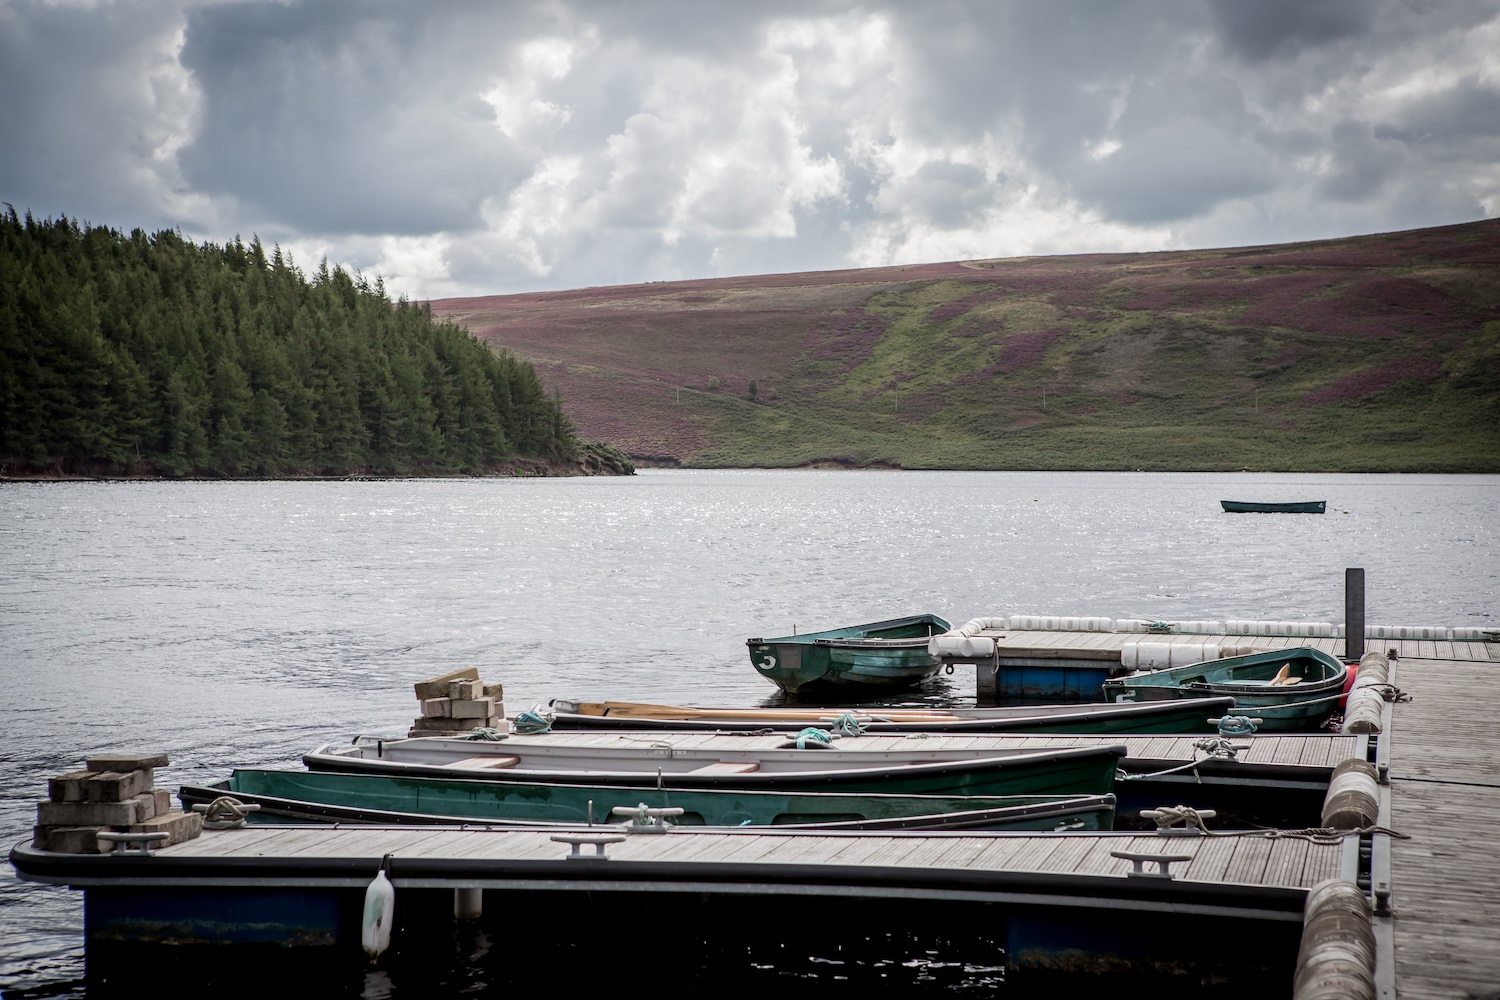 Boats at Whiteadder Reservoir with trees in background, East Lothian